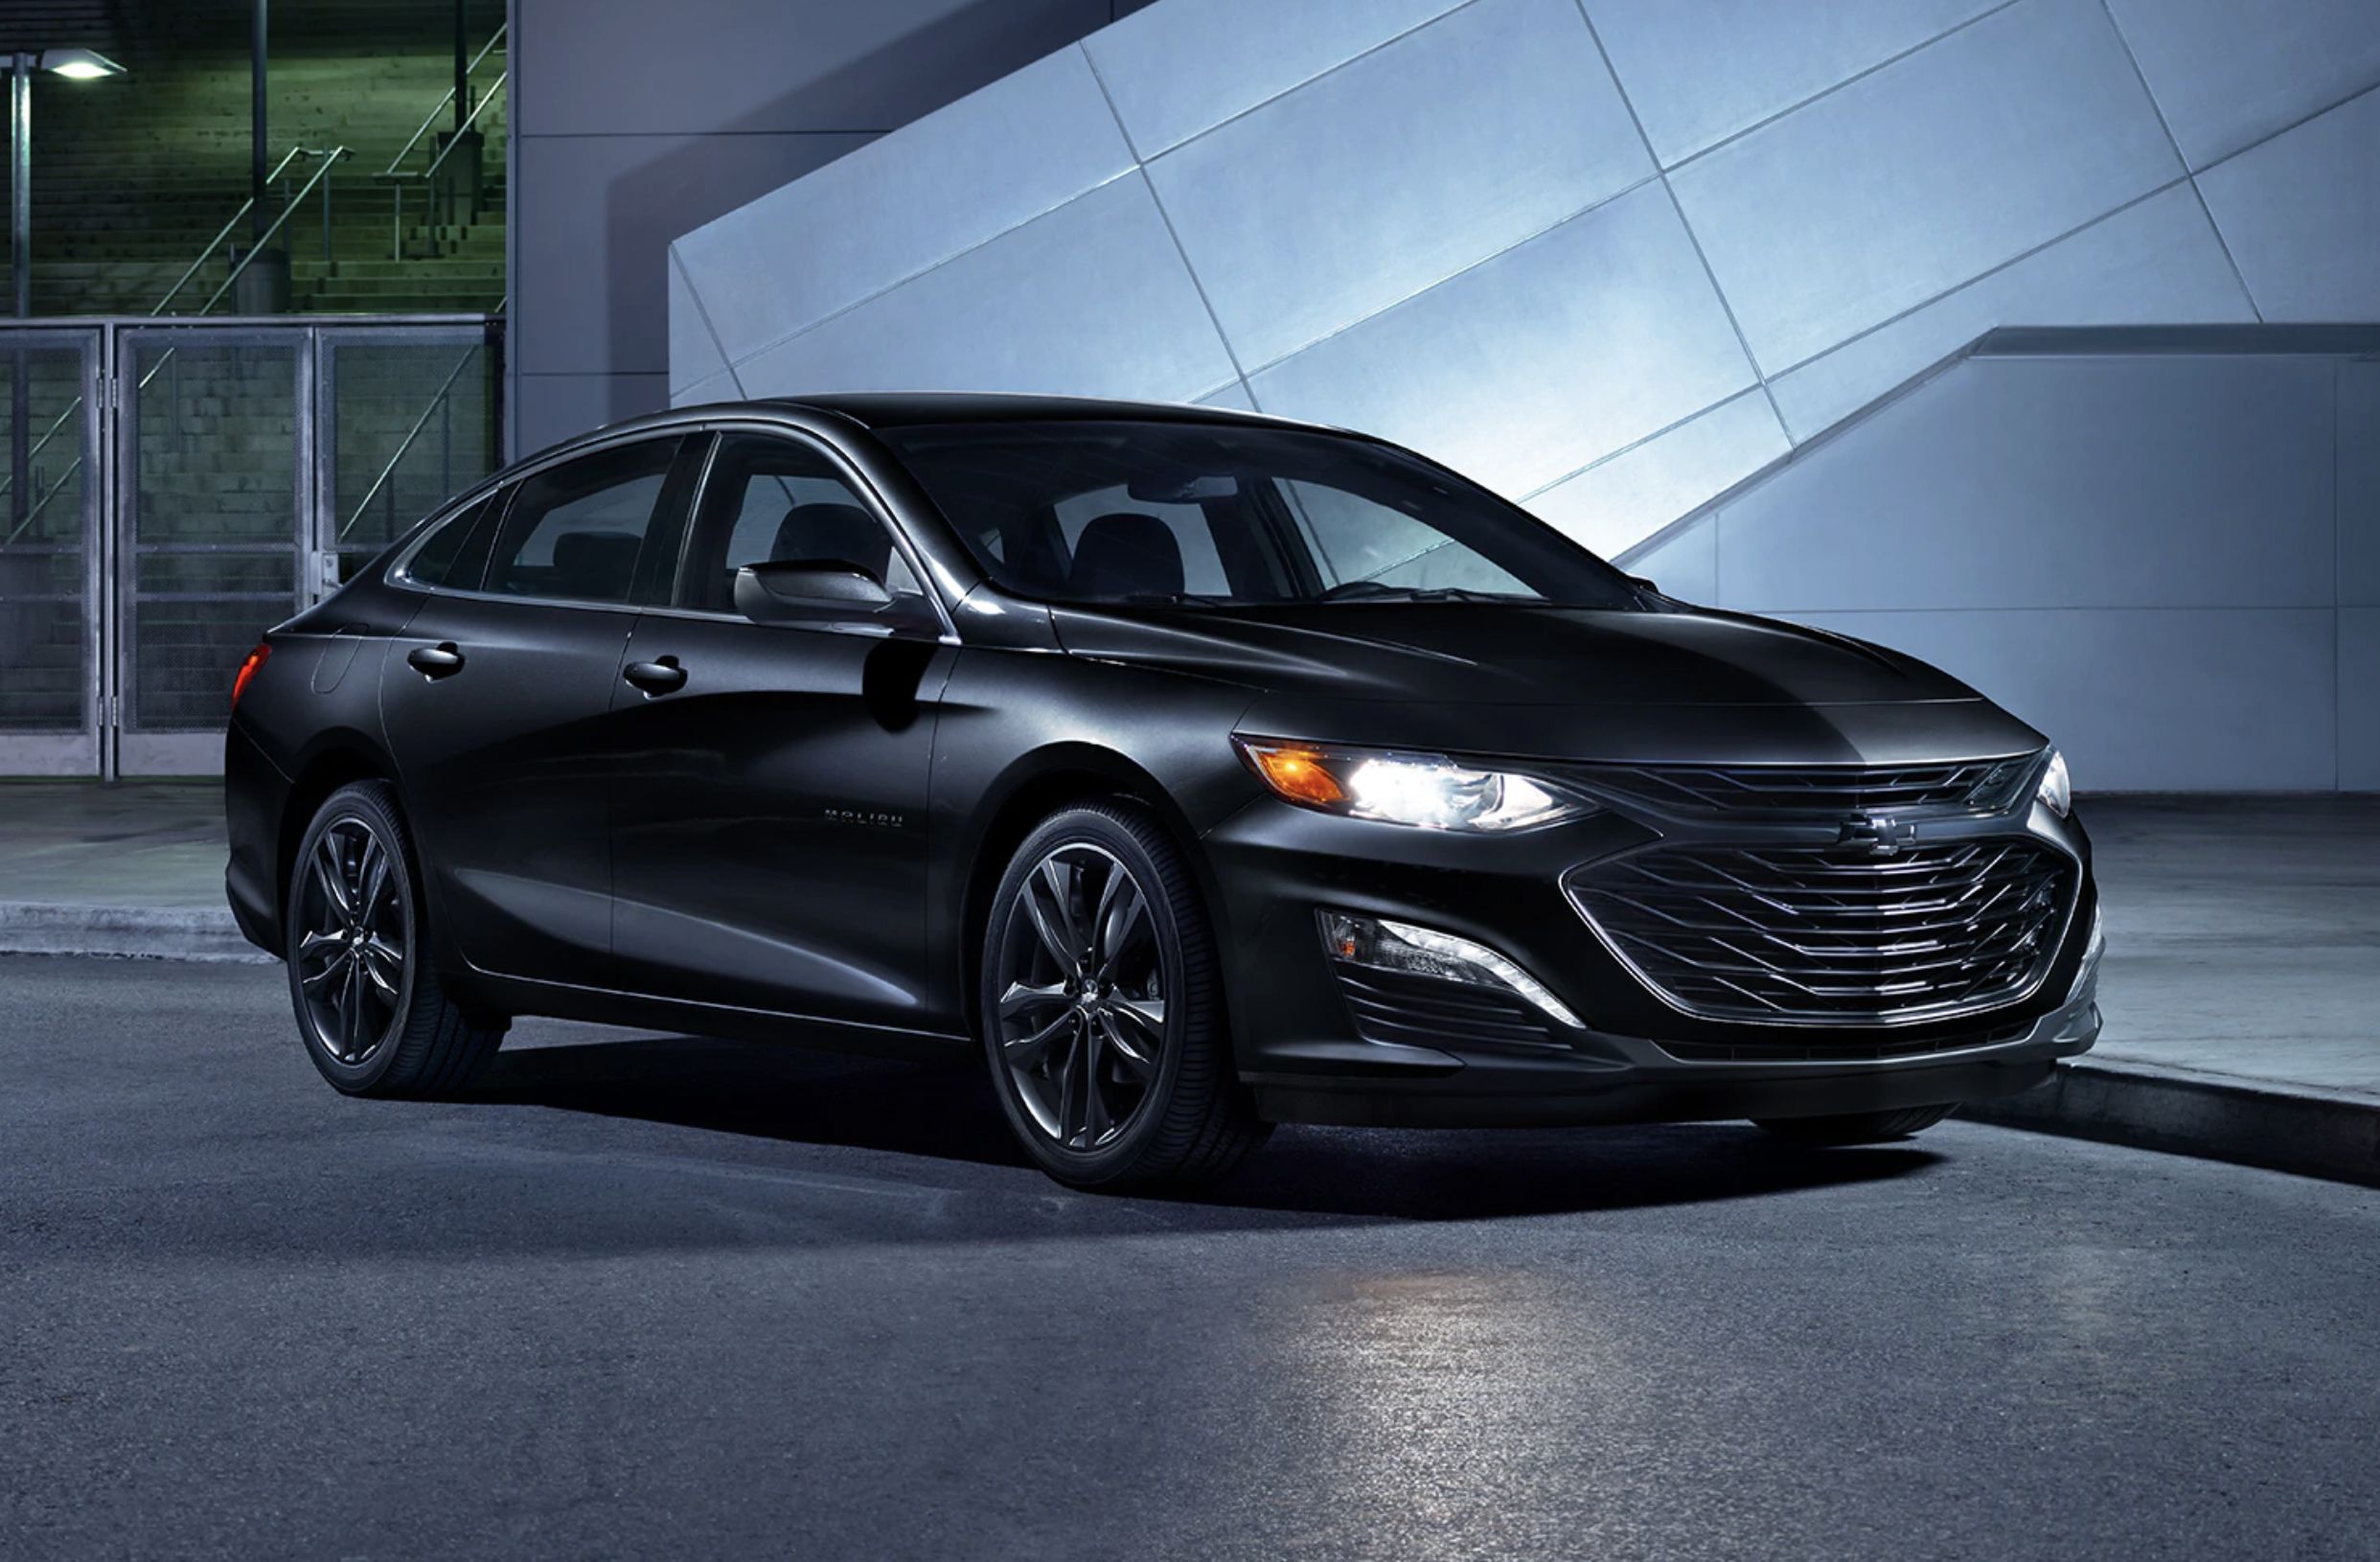 2021 Chevrolet Malibu Review, Pricing, and Specs